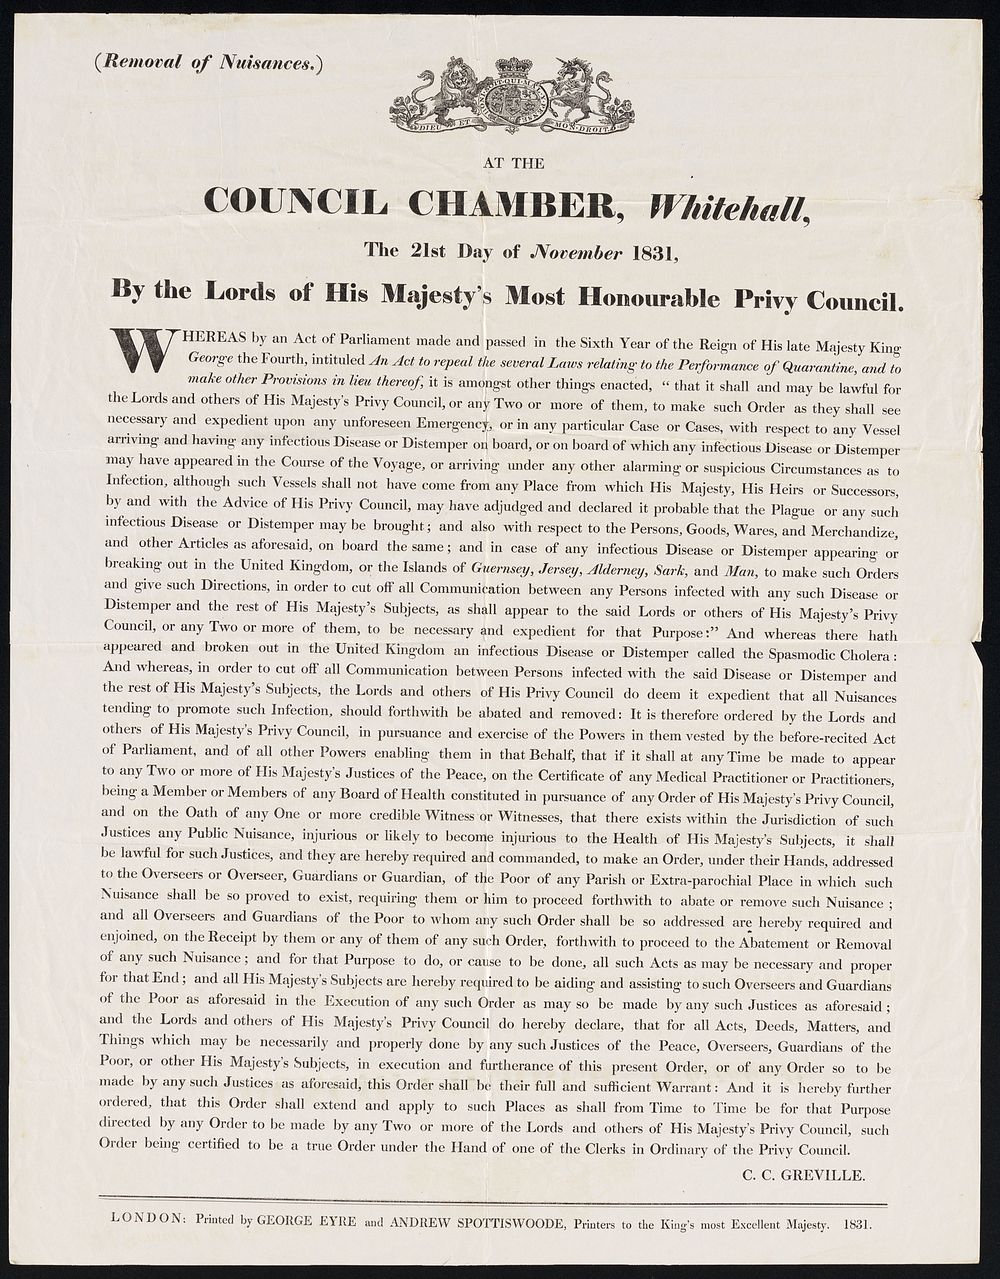 At the council chamber, Whitehall, the 21st day of November 1831 / by the Lords of His Majesty's Privy Council ; C.C.…